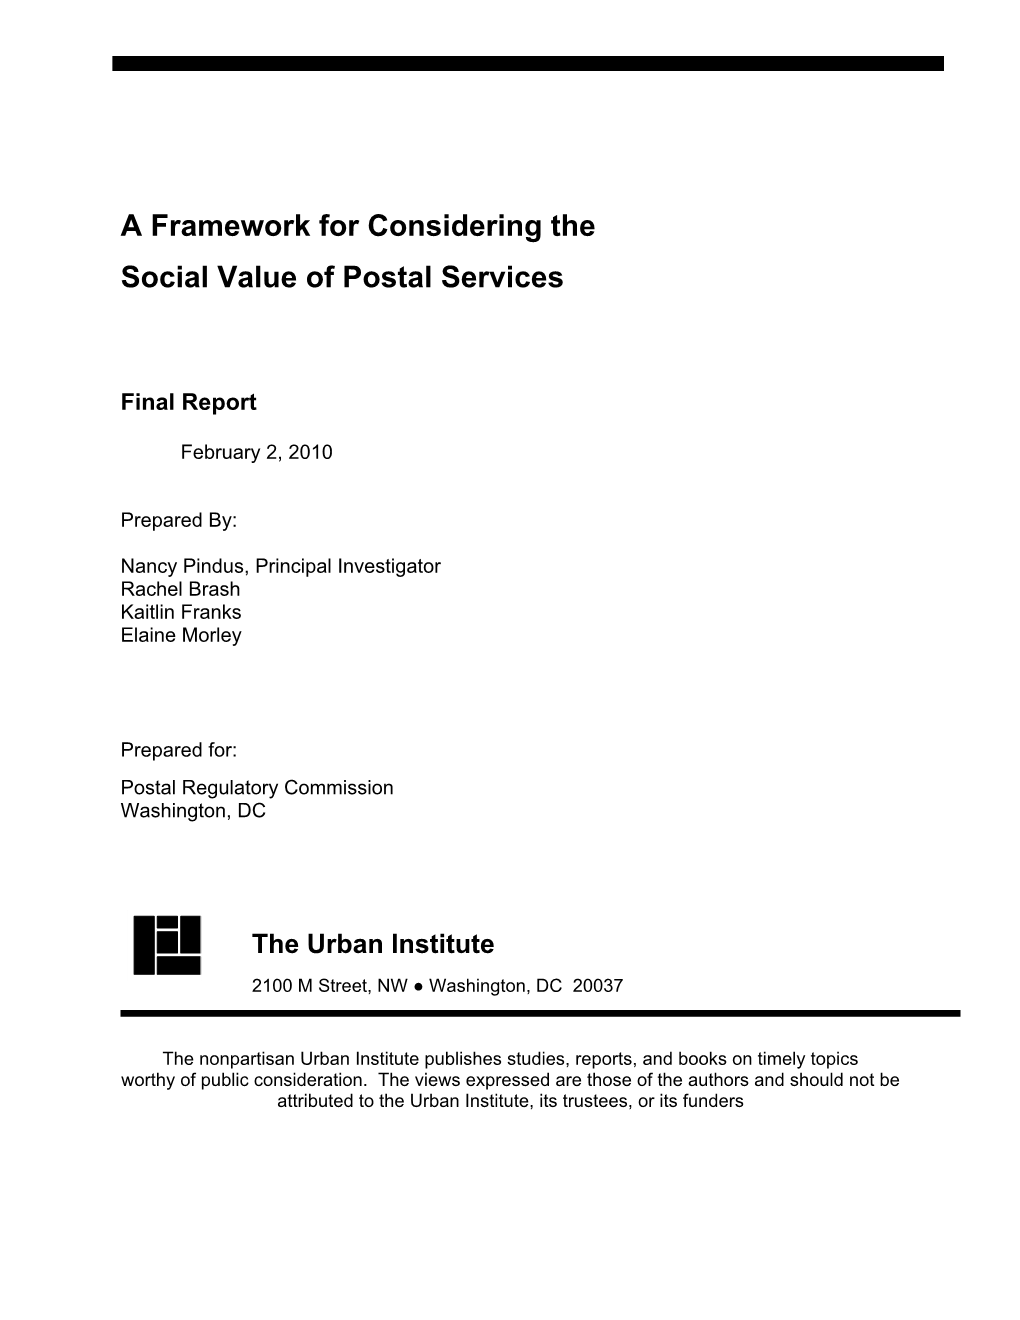 A Framework for Considering the Social Value of Postal Services